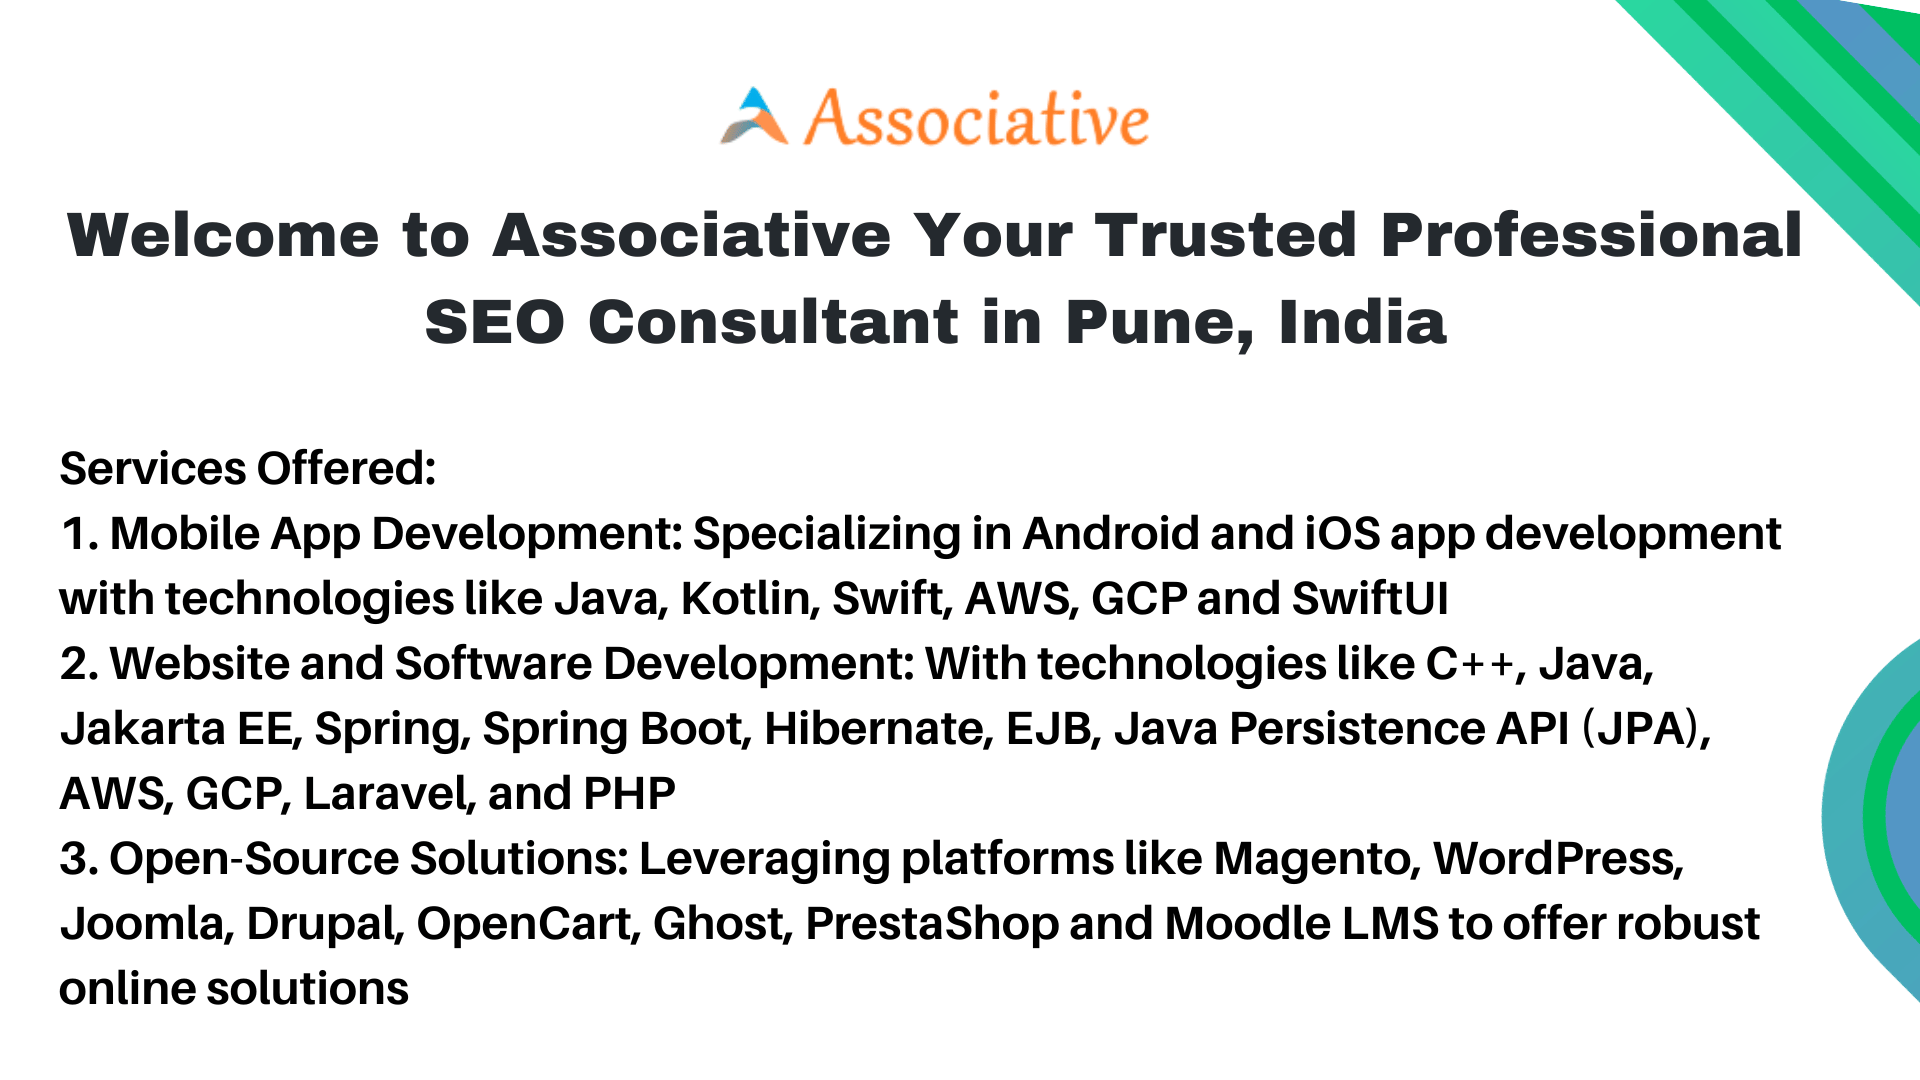 Welcome to Associative Your Trusted Professional SEO Consultant in Pune India